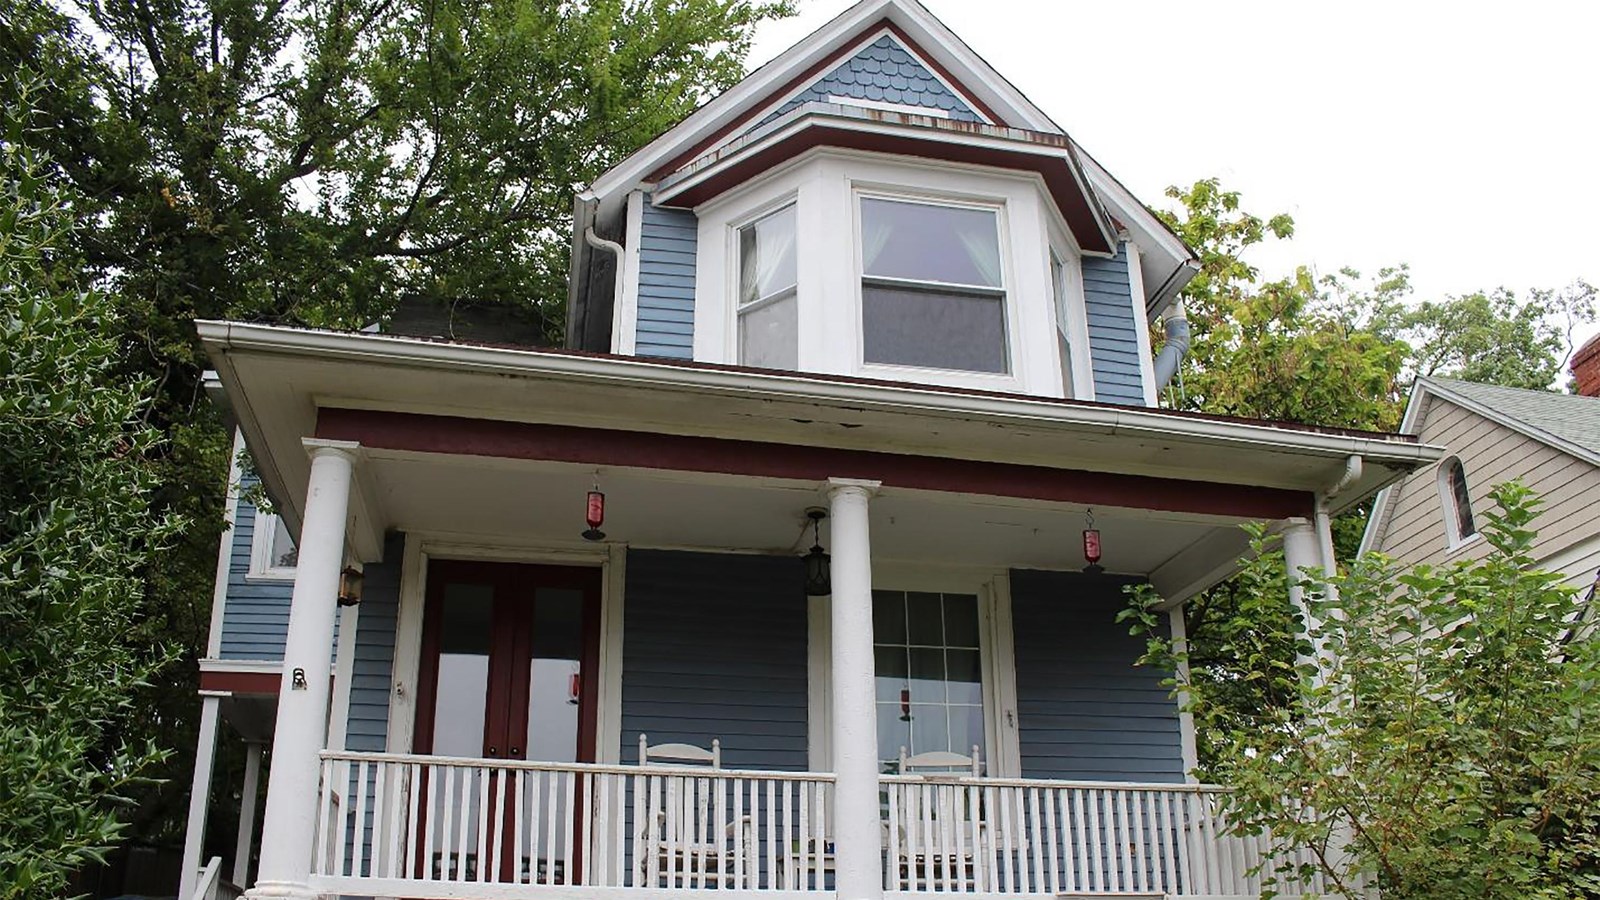 Domestic two story dwelling with a porch leading to the main entrance. The house sits atop a small